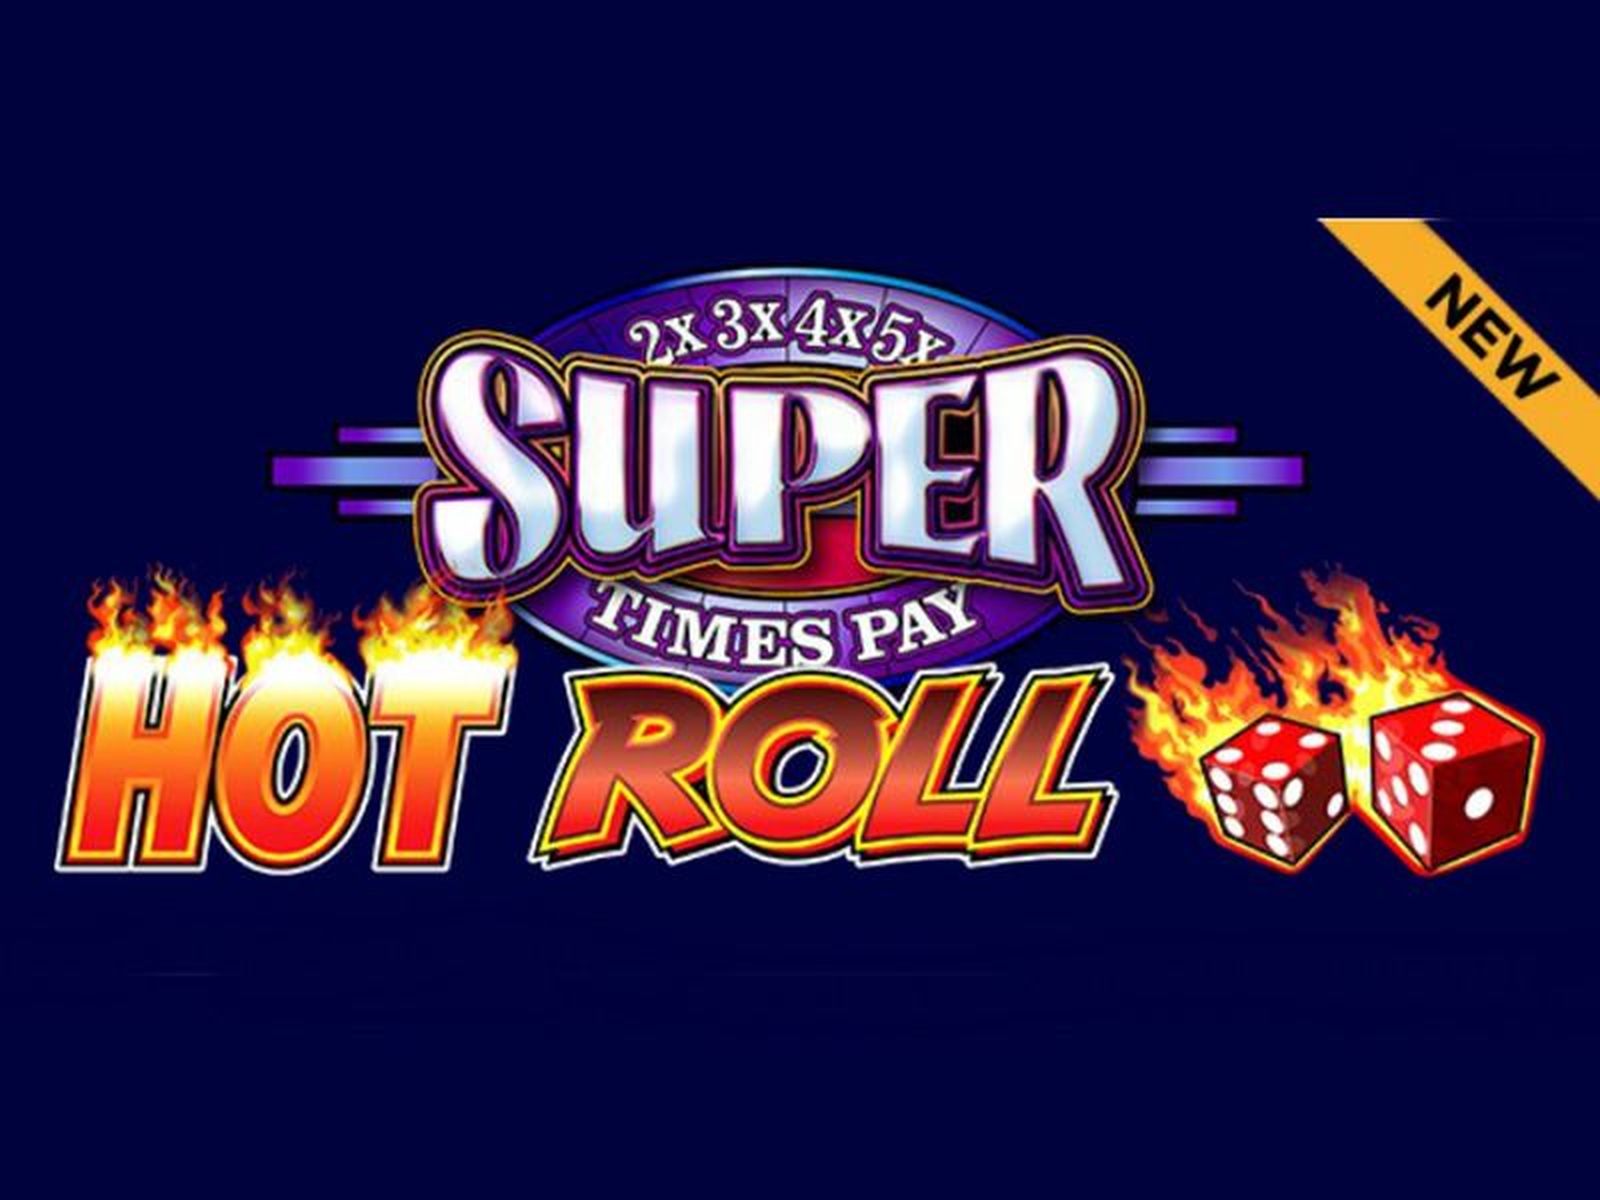 Super Times Pay Hot Roll demo